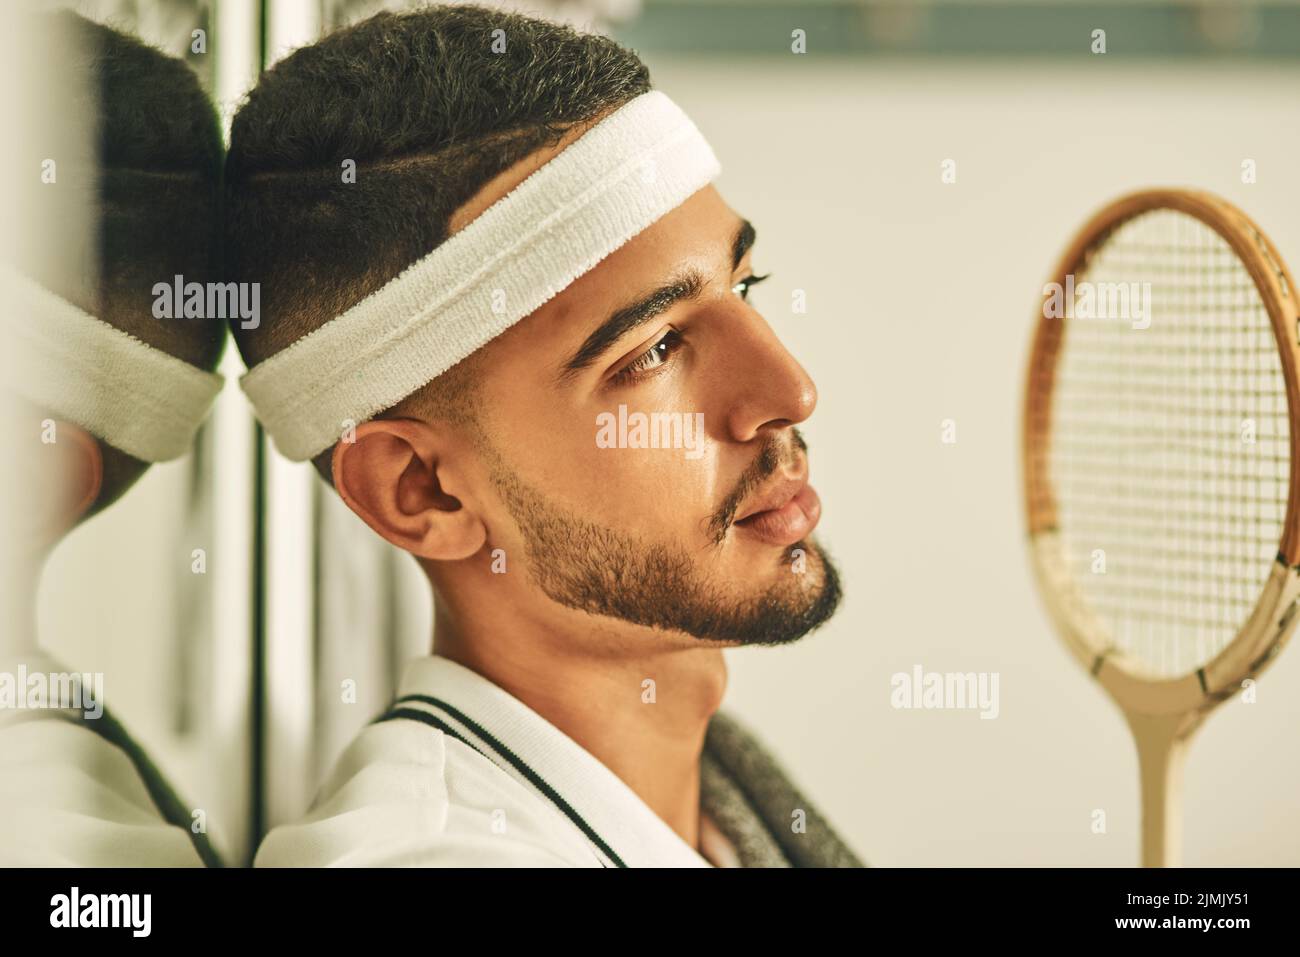 A game of physical and mental skill. a young man looking thoughtful in the locker room after a game of squash. Stock Photo